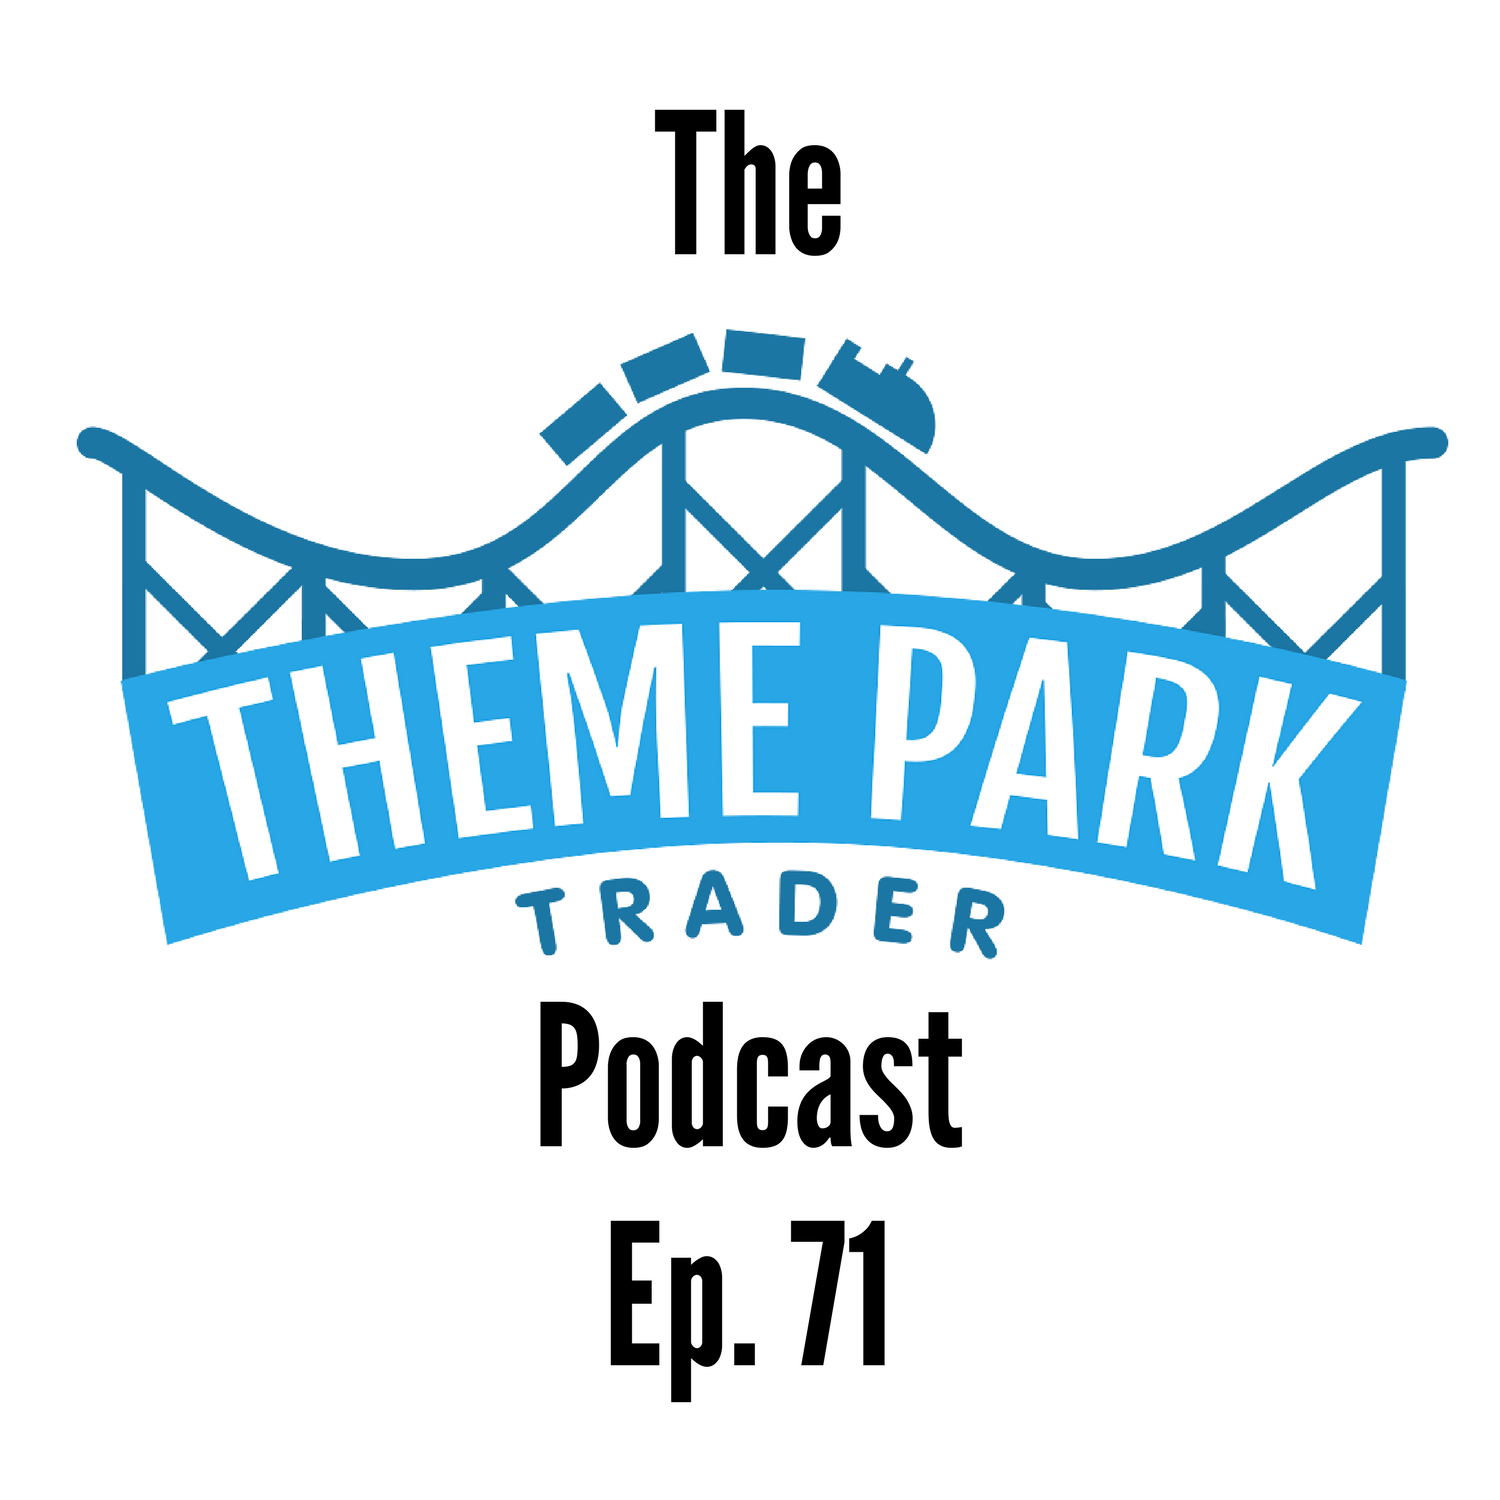 Episode 71 - Disney Movie Magic at DHS, Preferred Parking at Disney Springs, Nighttime Lights at Hogwarts, Poor Reviews of Great Theme Park Restaurants Returns  + More!